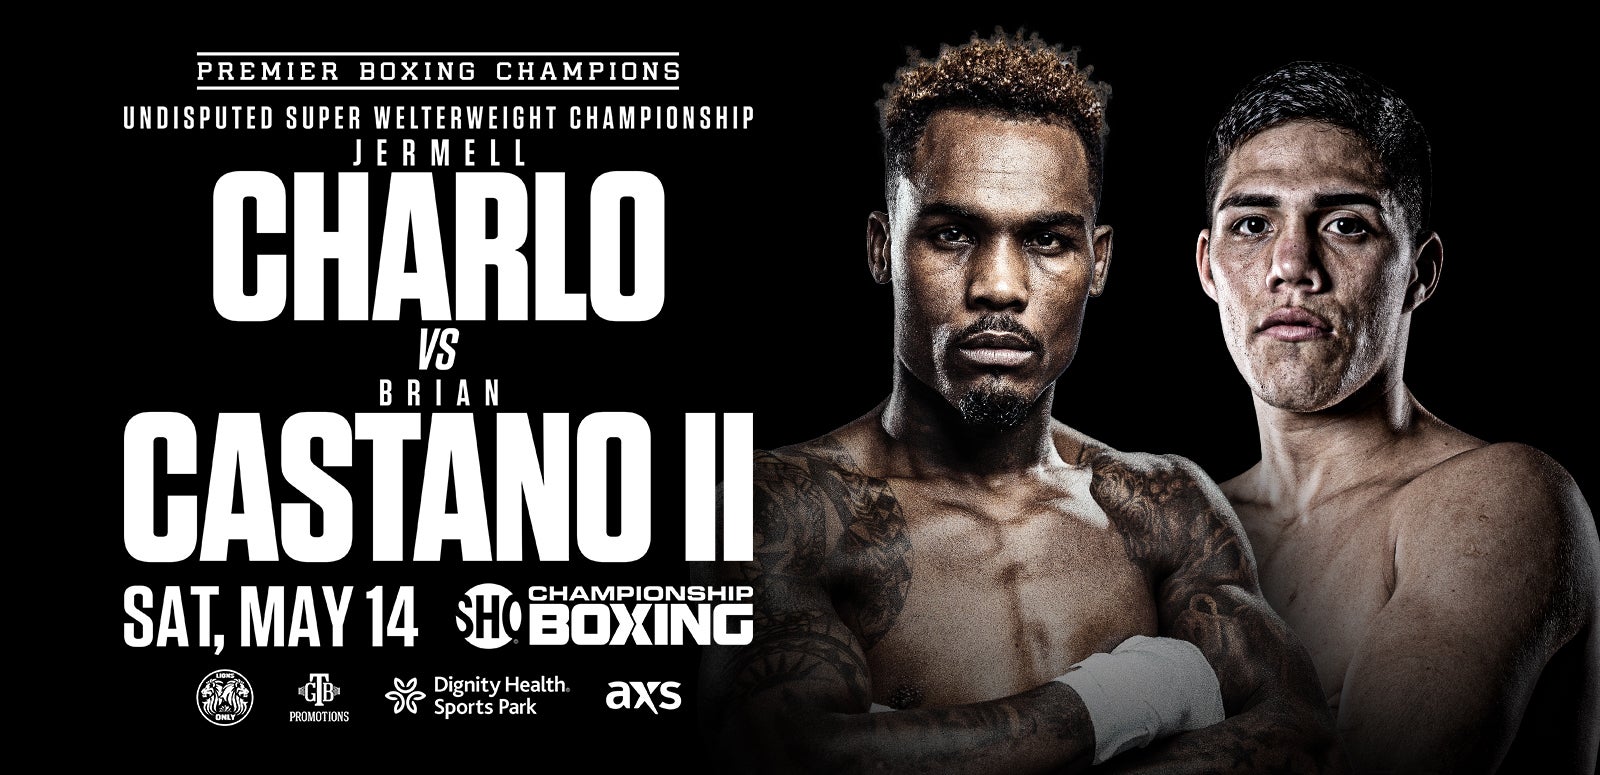 Charlo vs Castano at Dignity Health Sports Park - Tickets on Sale March 31